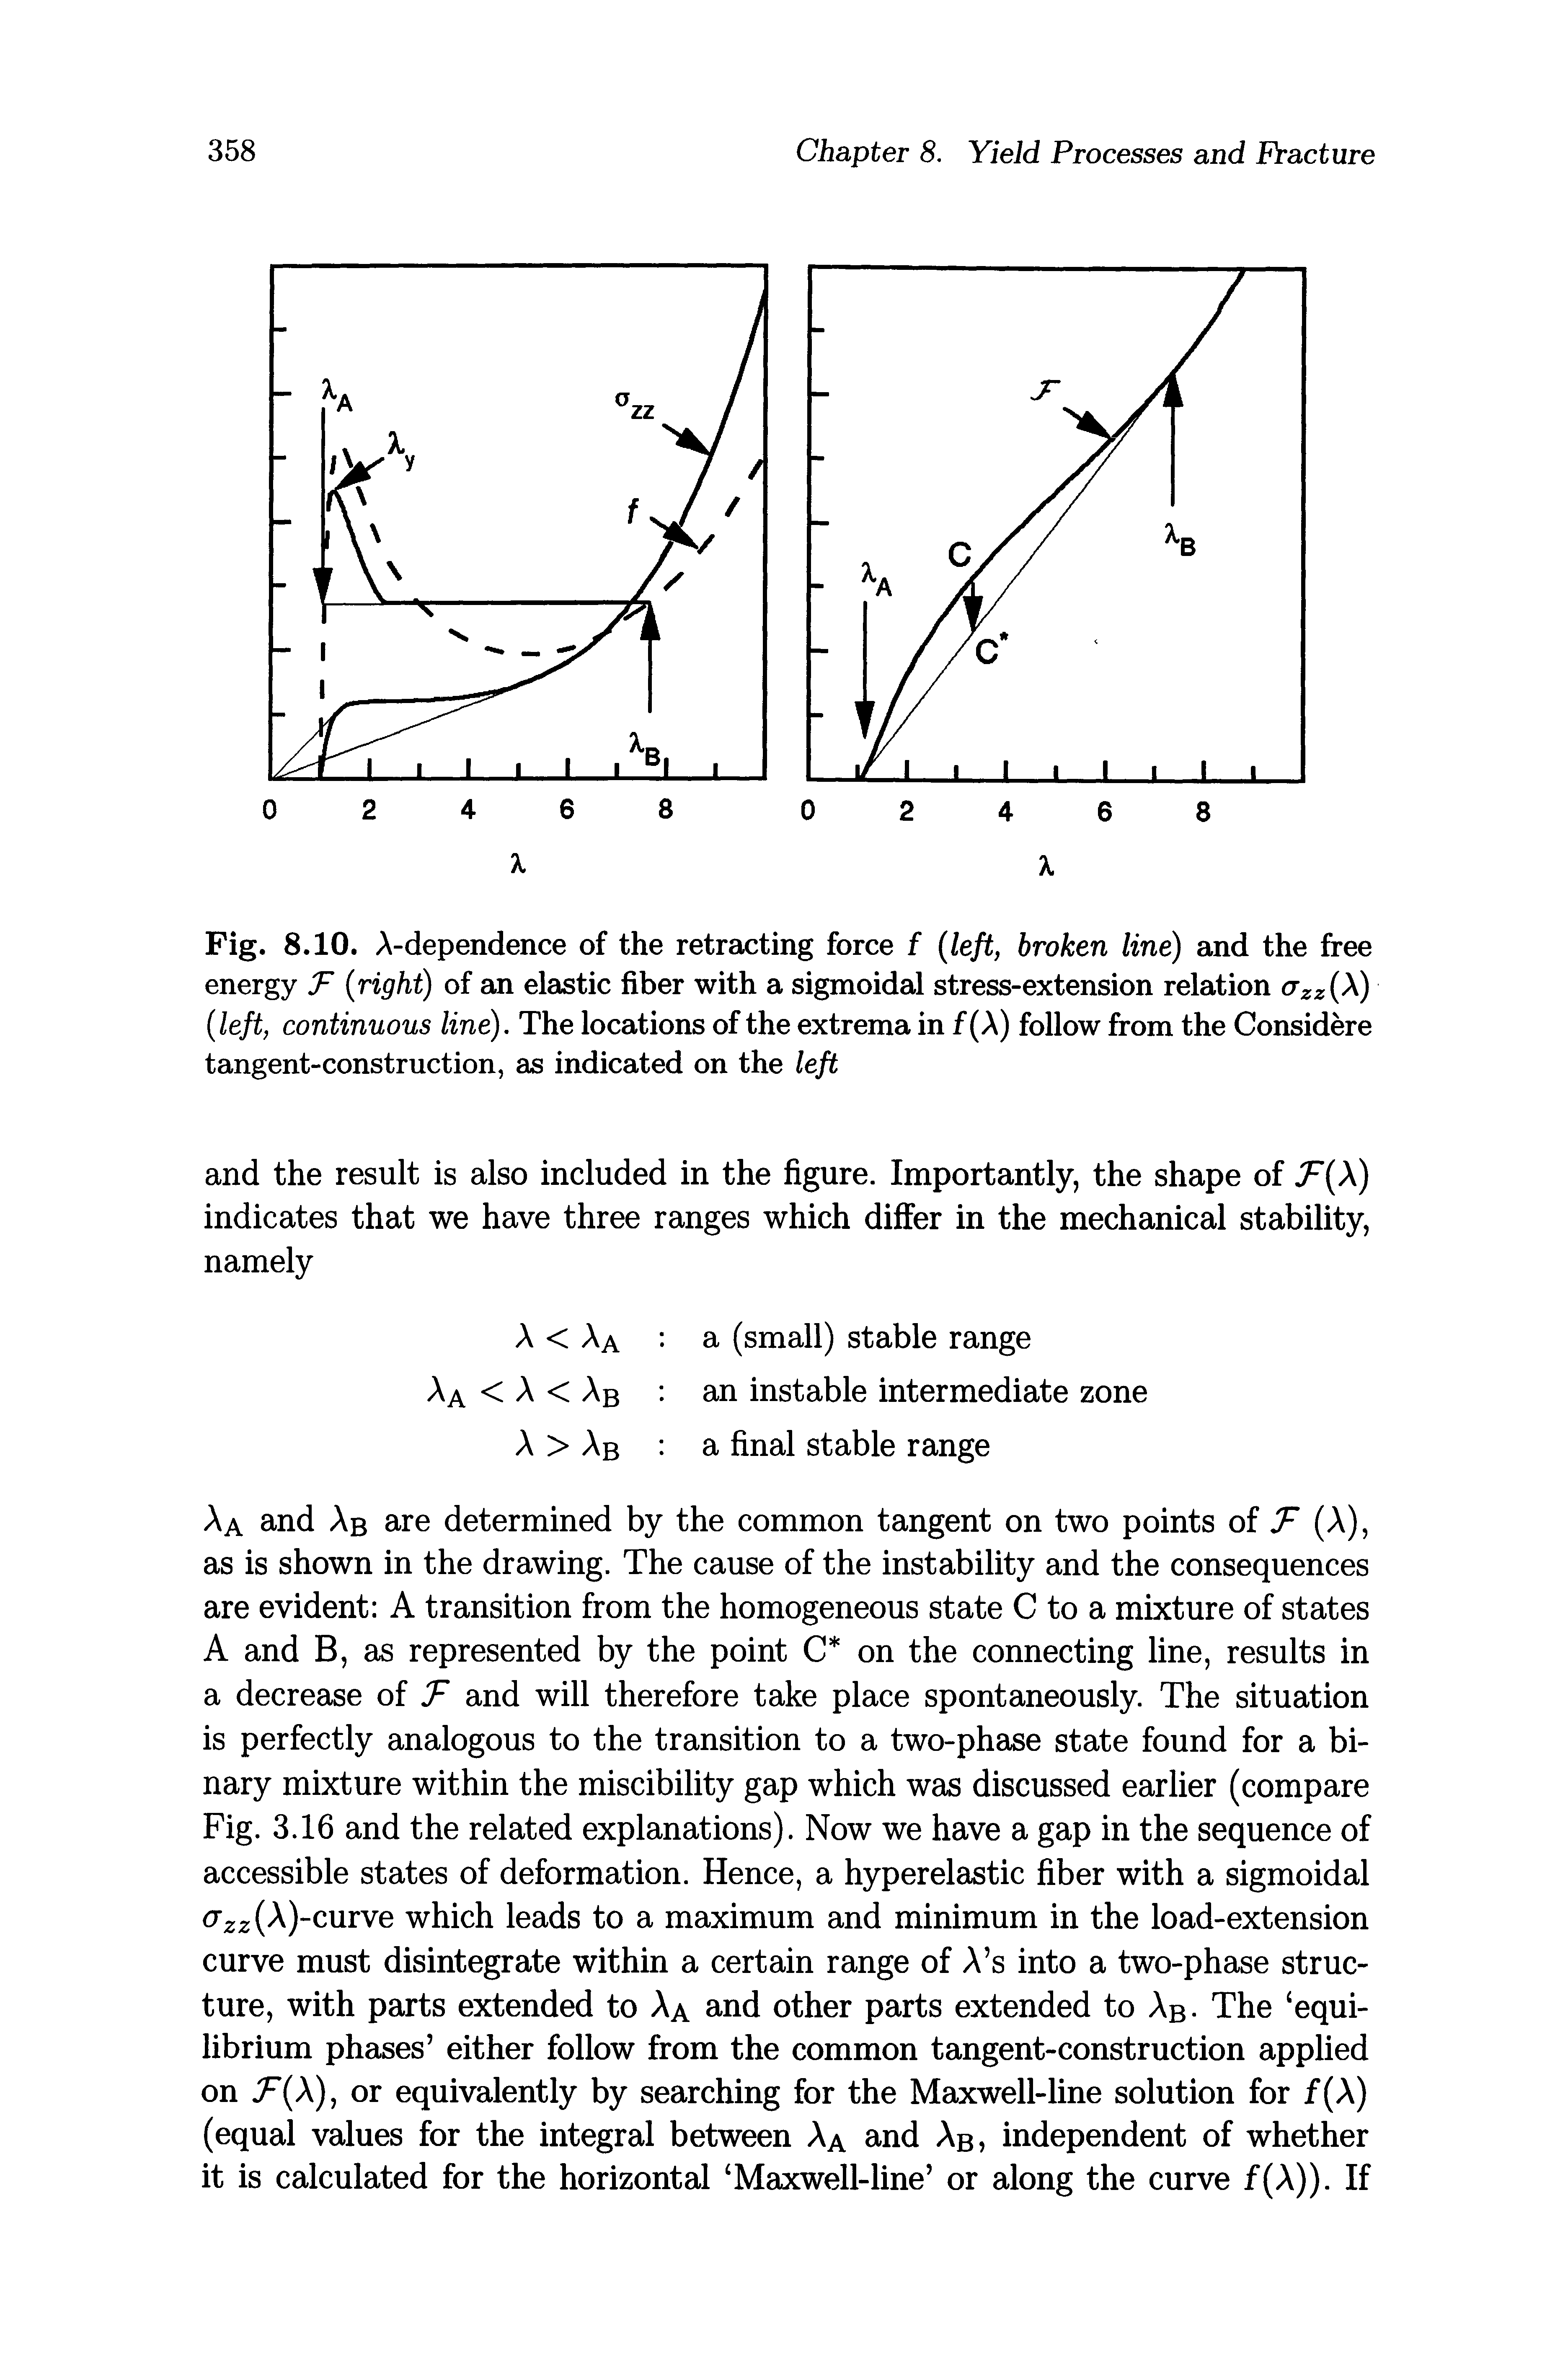 Fig. 8.10. A-dependence of the retracting force f left, broken line) and the free energy right) of an elastic fiber with a sigmoidal stress-extension relation <r (A) left, continuous line). The locations of the extrema in f (A) follow from the Considere tangent-construction, as indicated on the left...